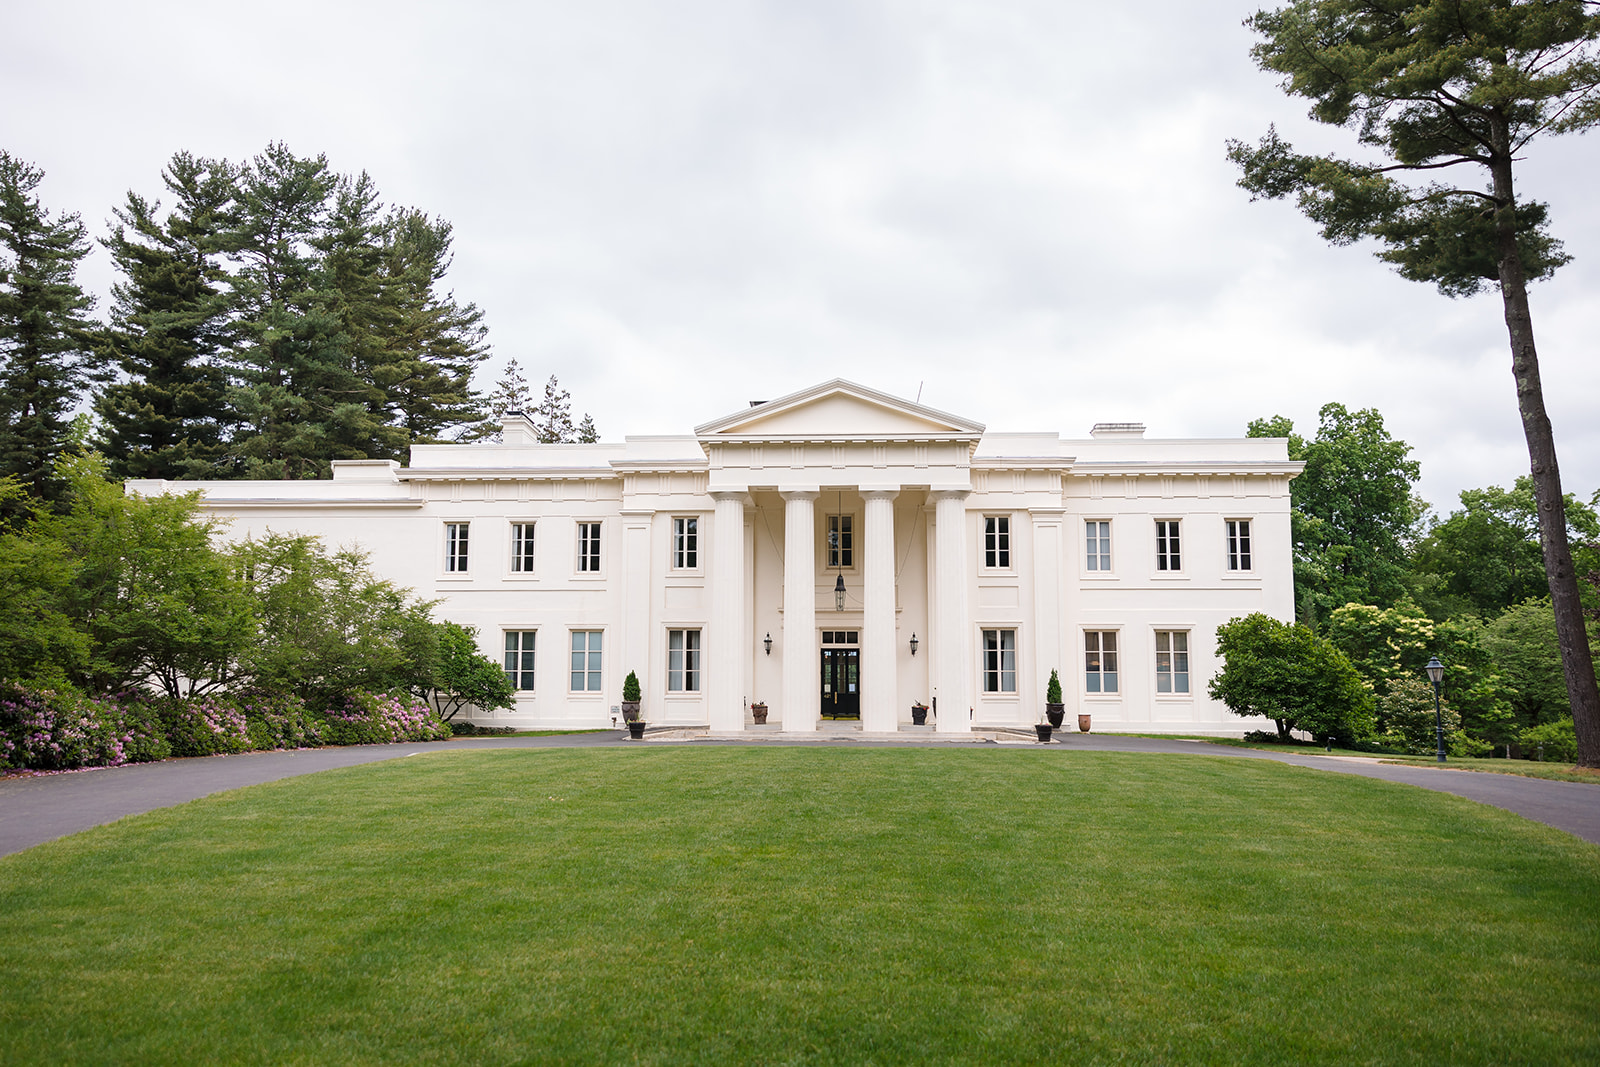 Grand exterior view of Wadsworth Mansion with its stately columns, surrounded by lush greenery and a manicured lawn